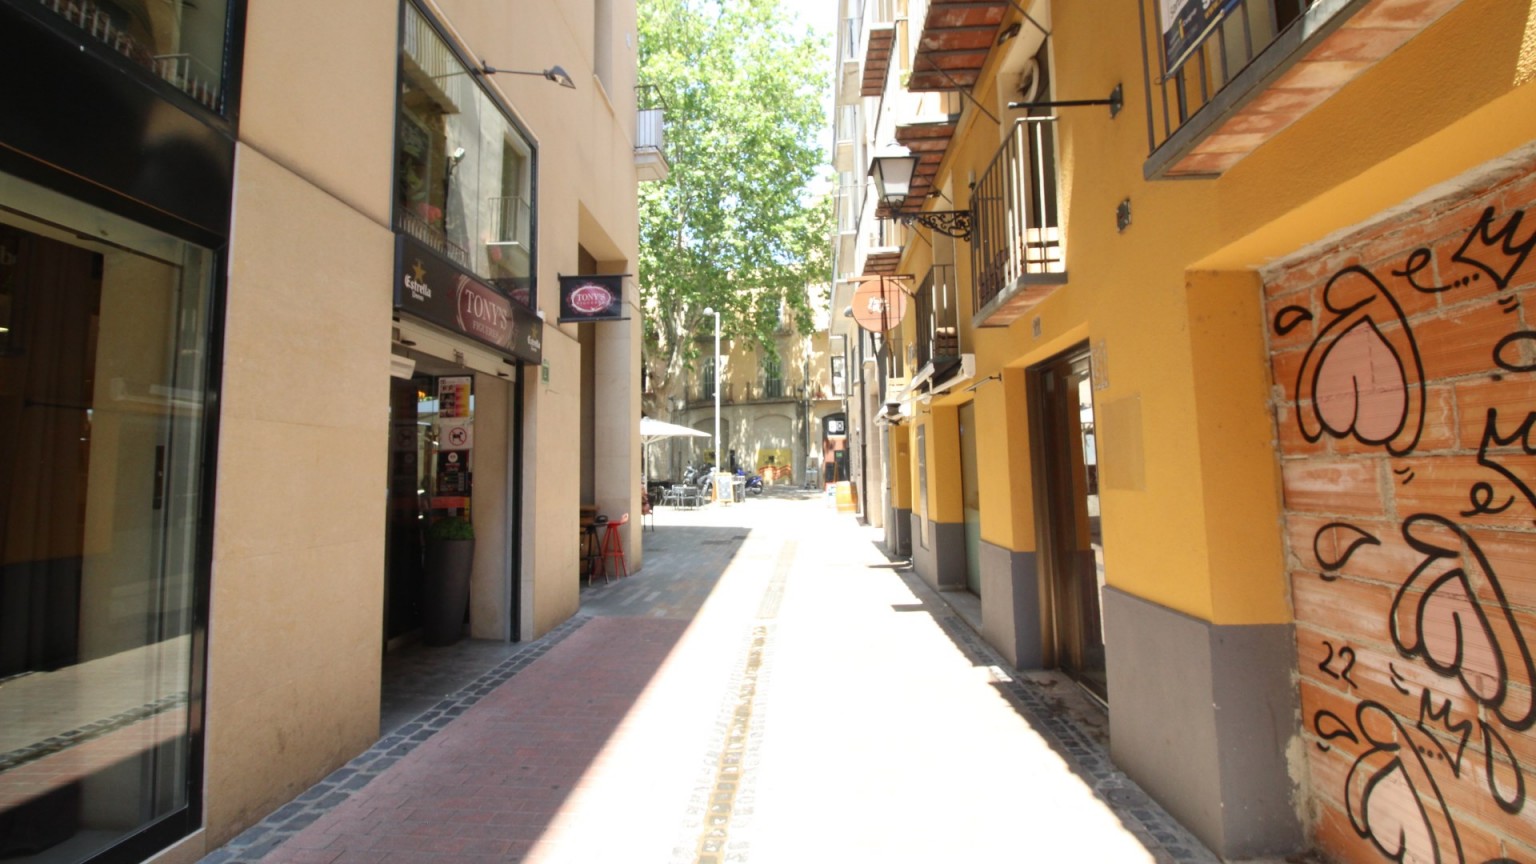 Premises for rent of 100m2 in the center of Figueres. Ideal situation to set up your business.